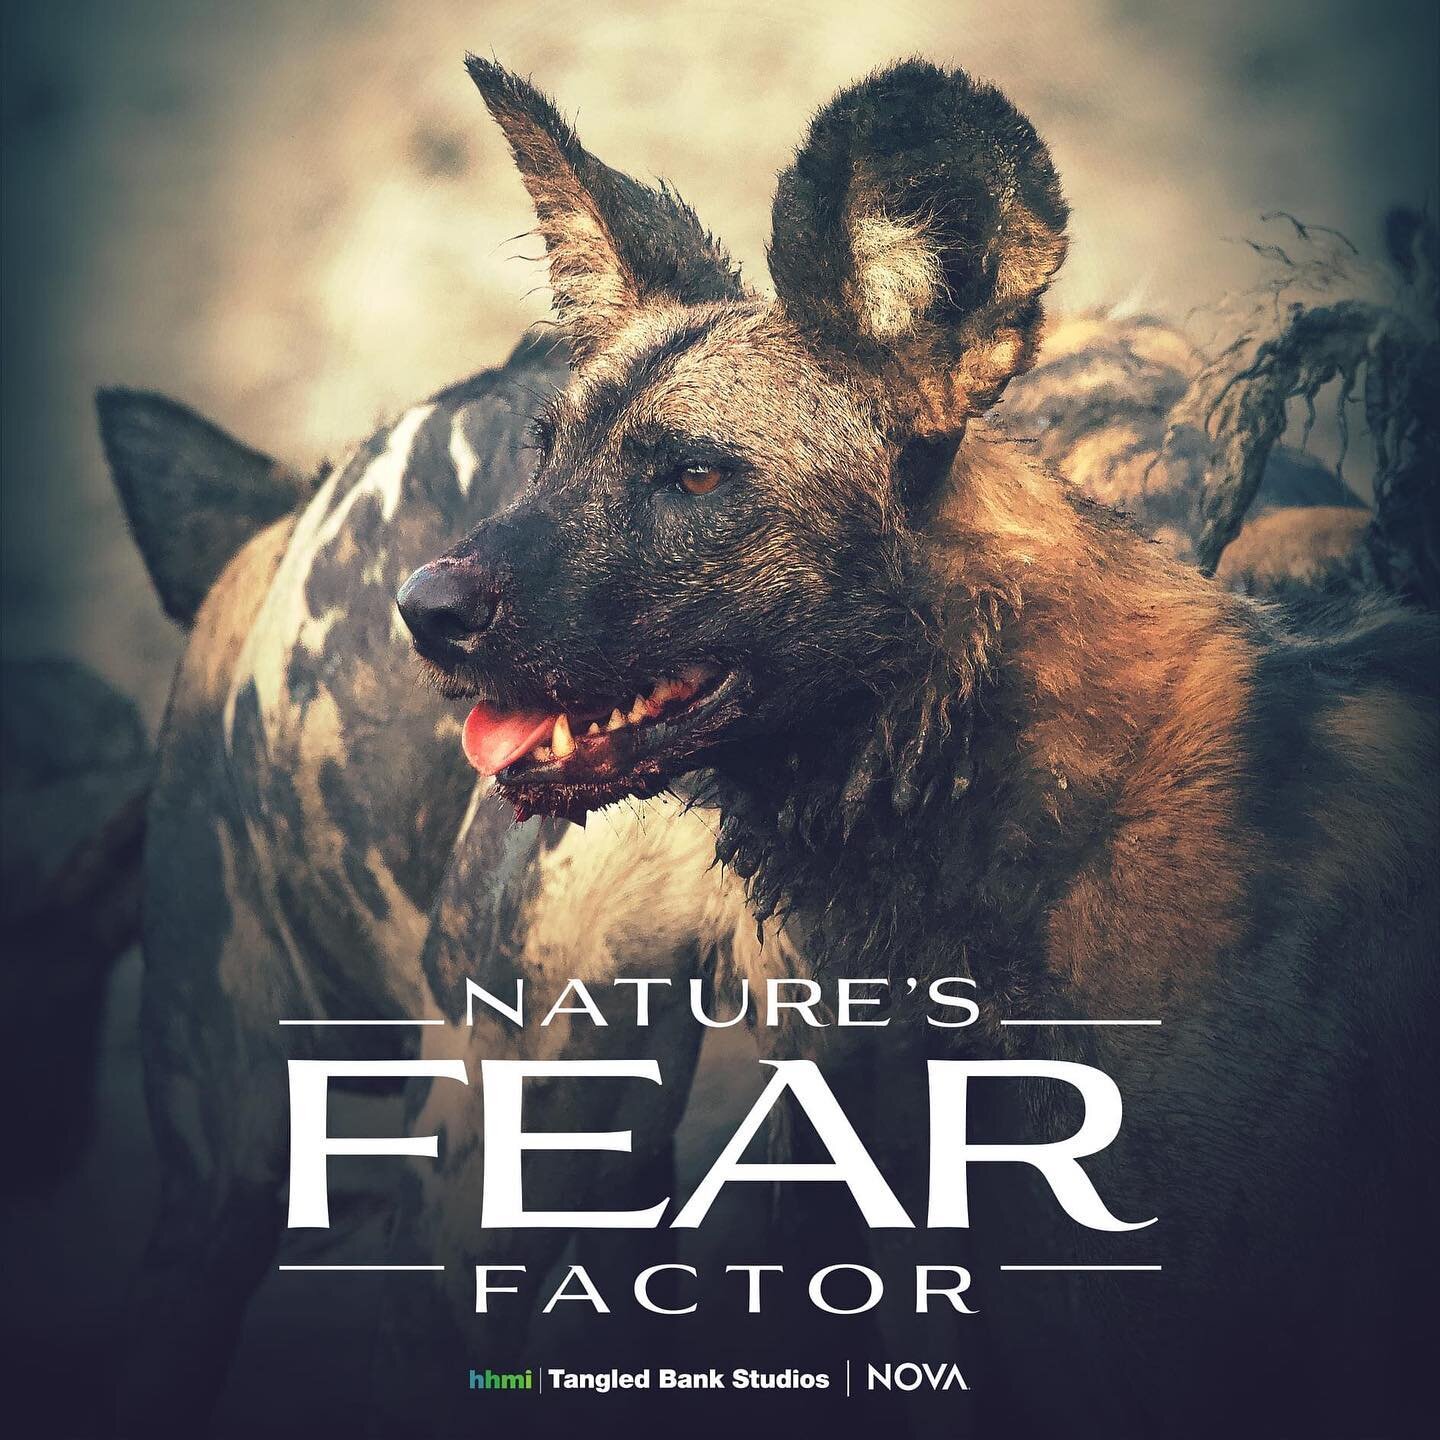 WATCH TONIGHT: Nature&rsquo;s Fear Factor at 8PM CST on PBS/NOVA. And streaming for free online after that. (http://www.pbs.org/wgbh/nova/video/natures-fear-factor/)

I shot and field produced this film about the reintroduction of wild dogs to Gorong